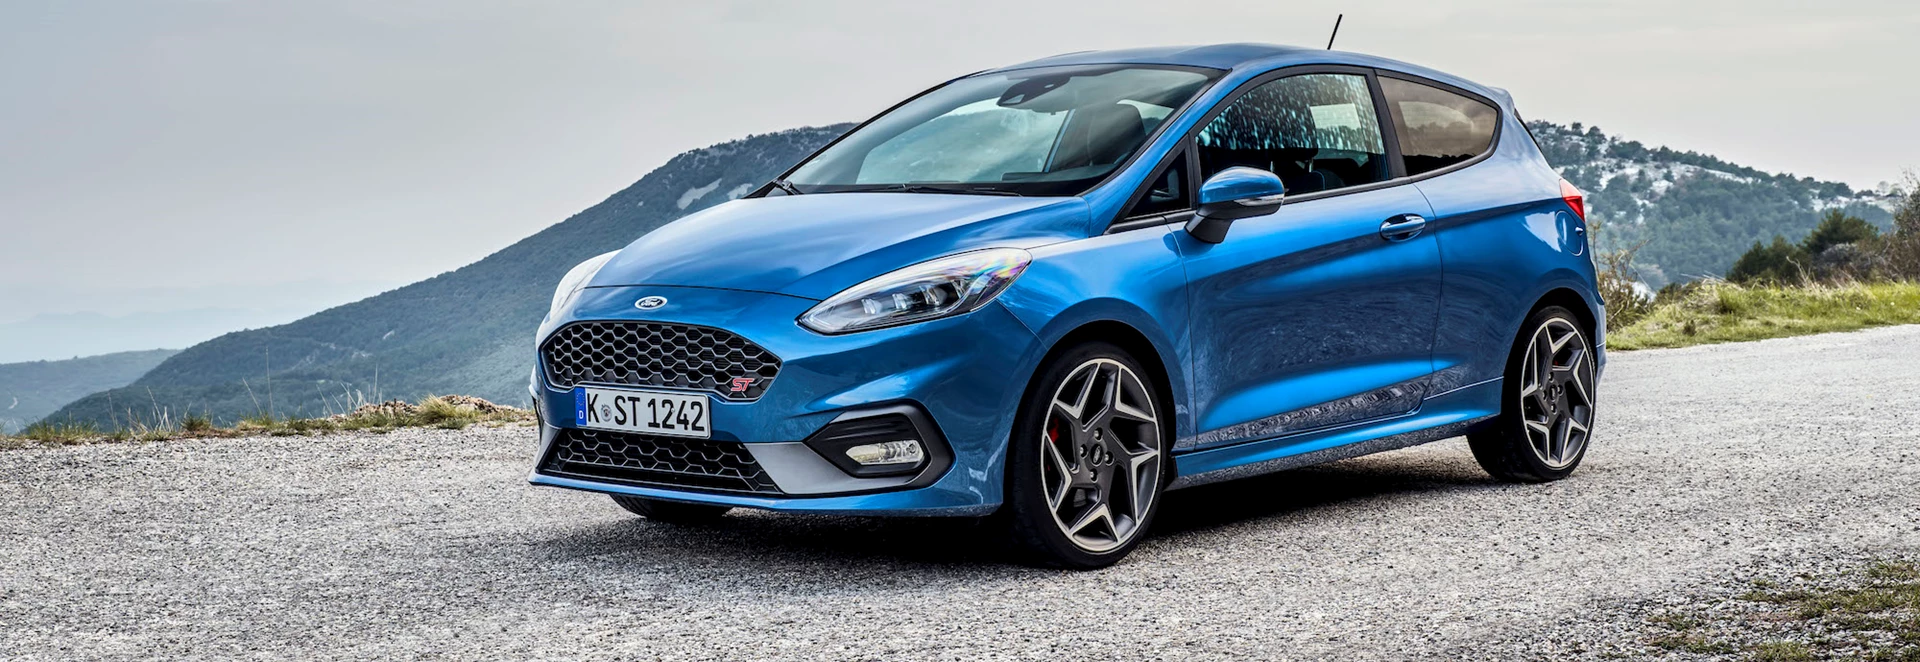 Buyers Guide to the Ford Fiesta ST